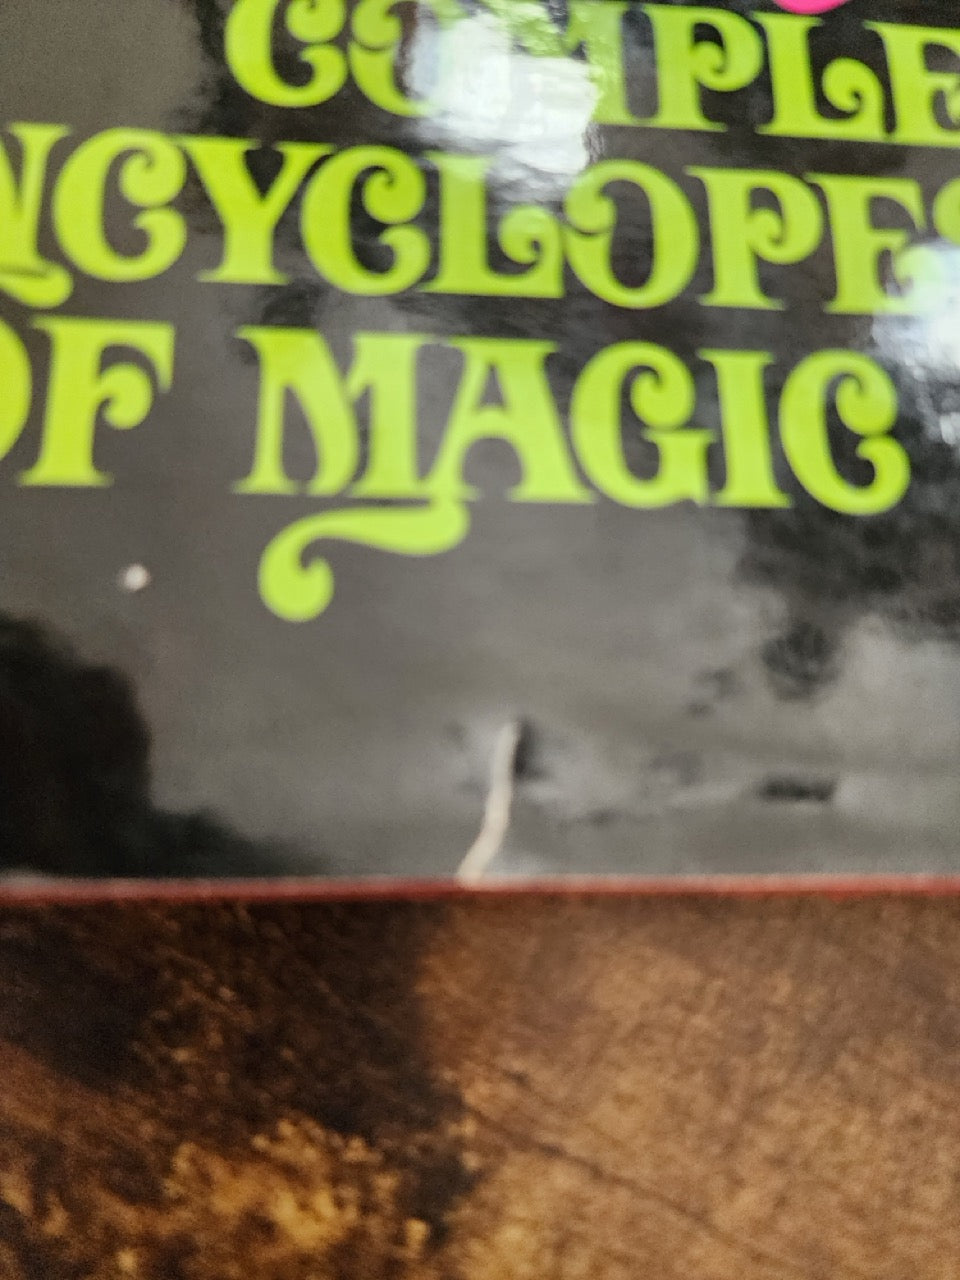 Dunninger's Complete Encyclopedia of Magic